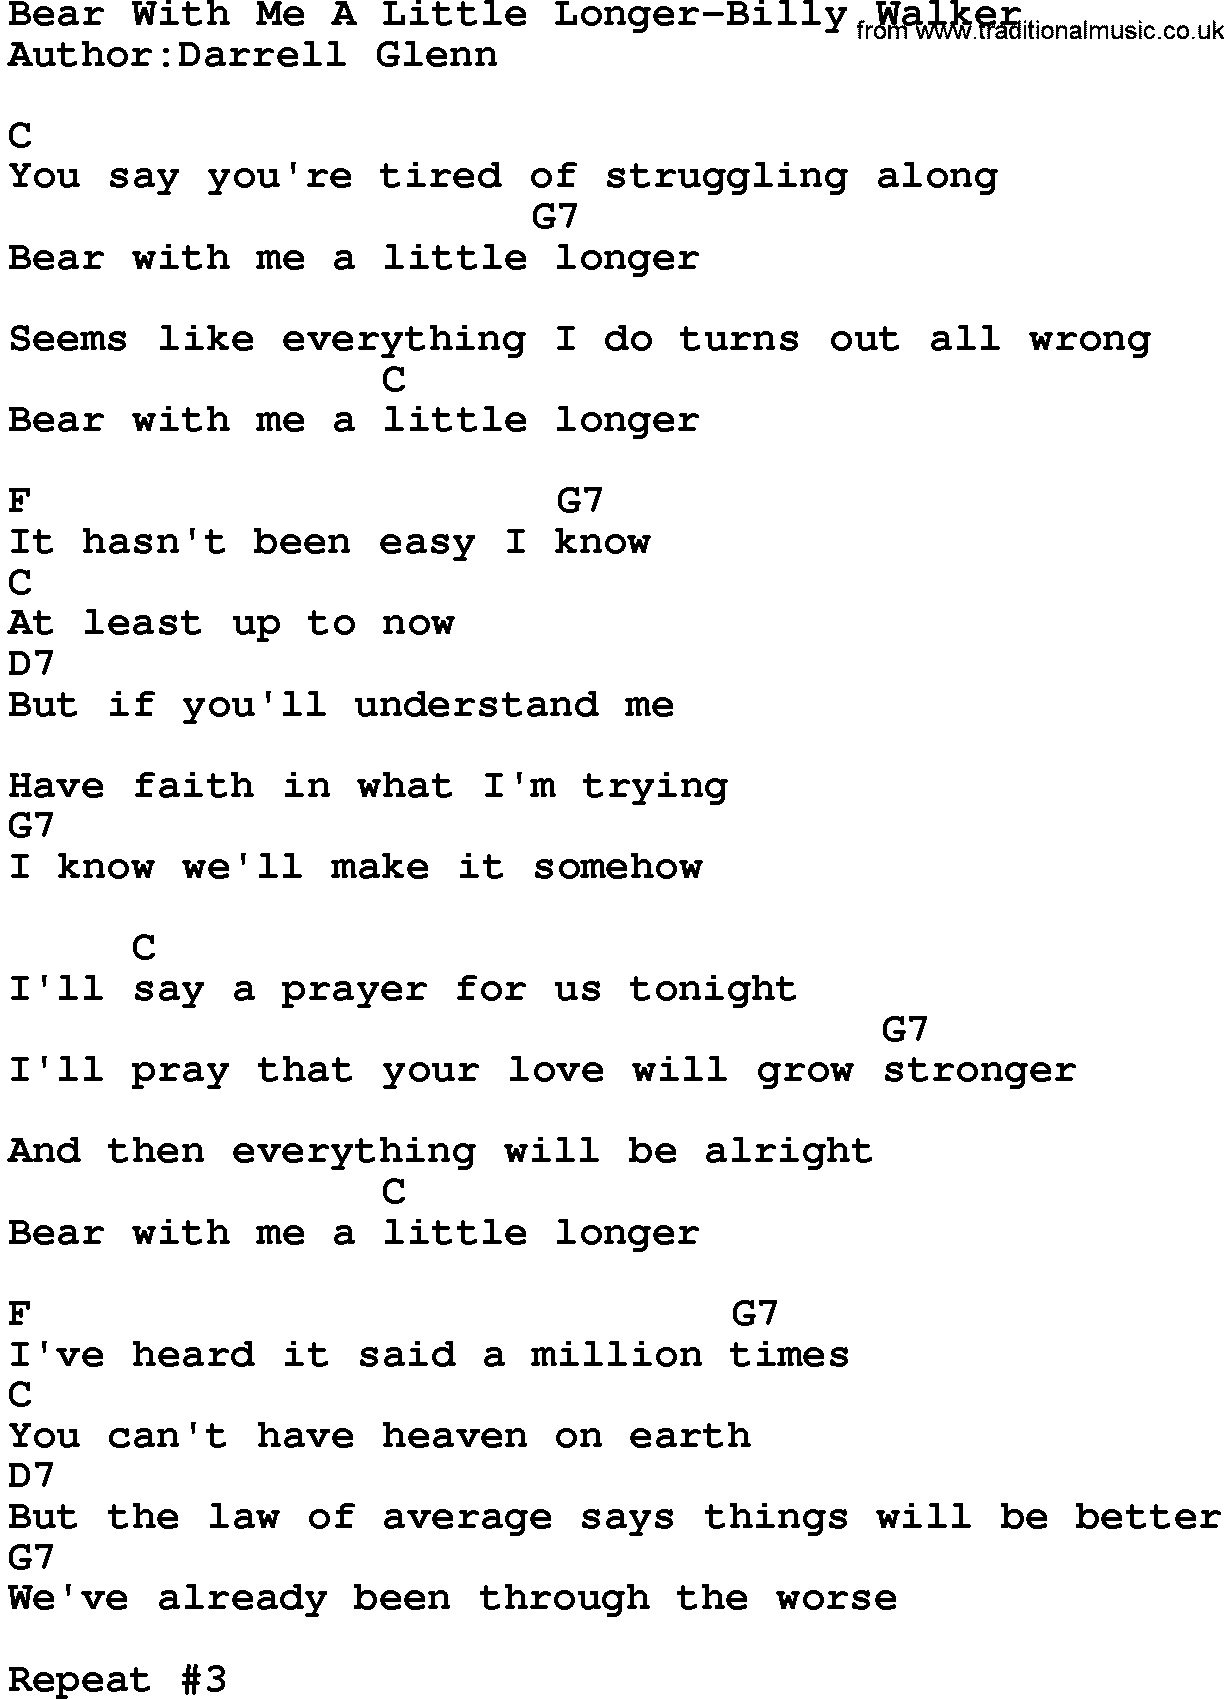 Country music song: Bear With Me A Little Longer-Billy Walker lyrics and chords